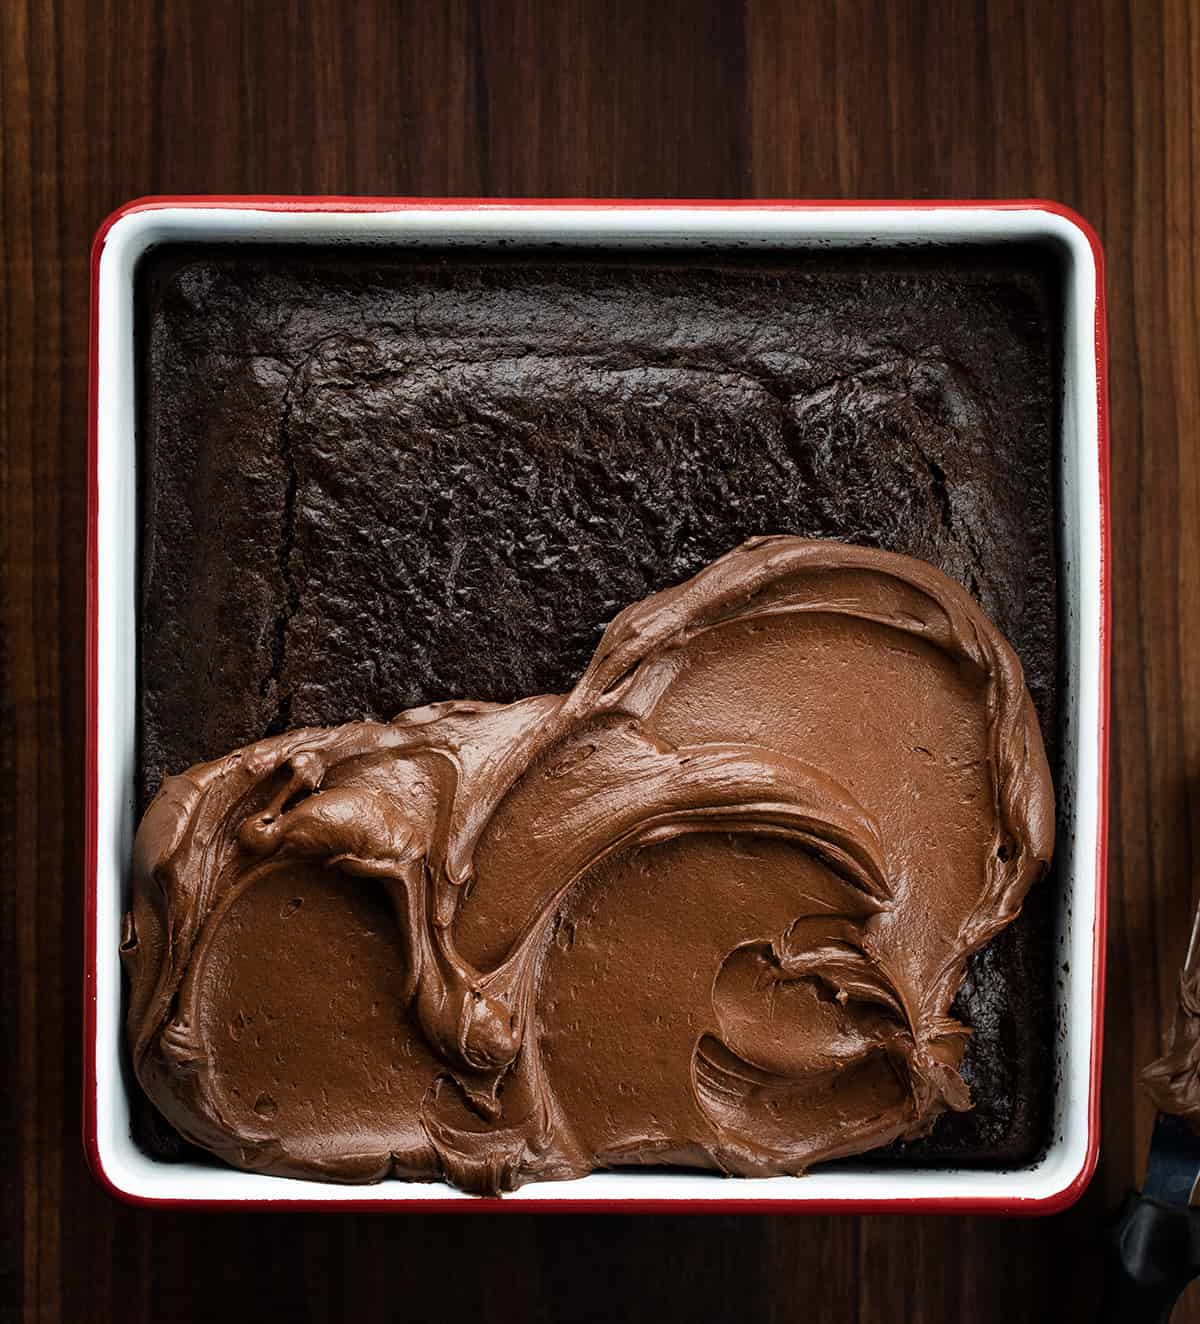 Chocolate Brownie Frosting Being Spread Over a Chocolate Mayo Cake.